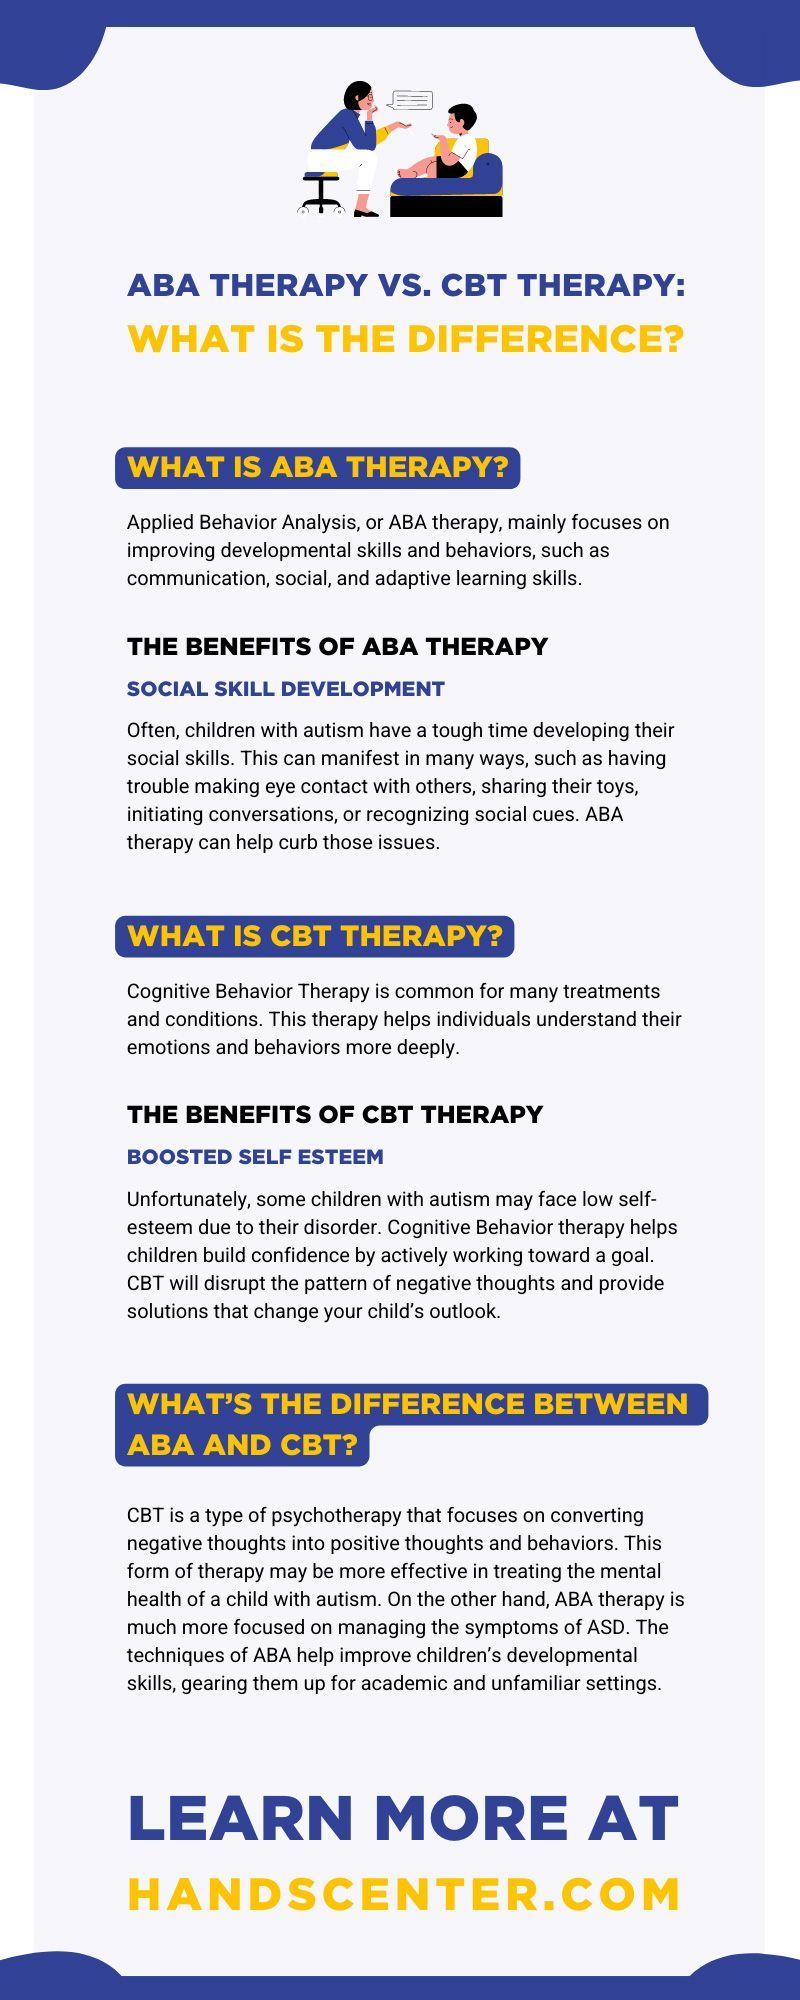 ABA Therapy vs. CBT Therapy: What Is the Difference?